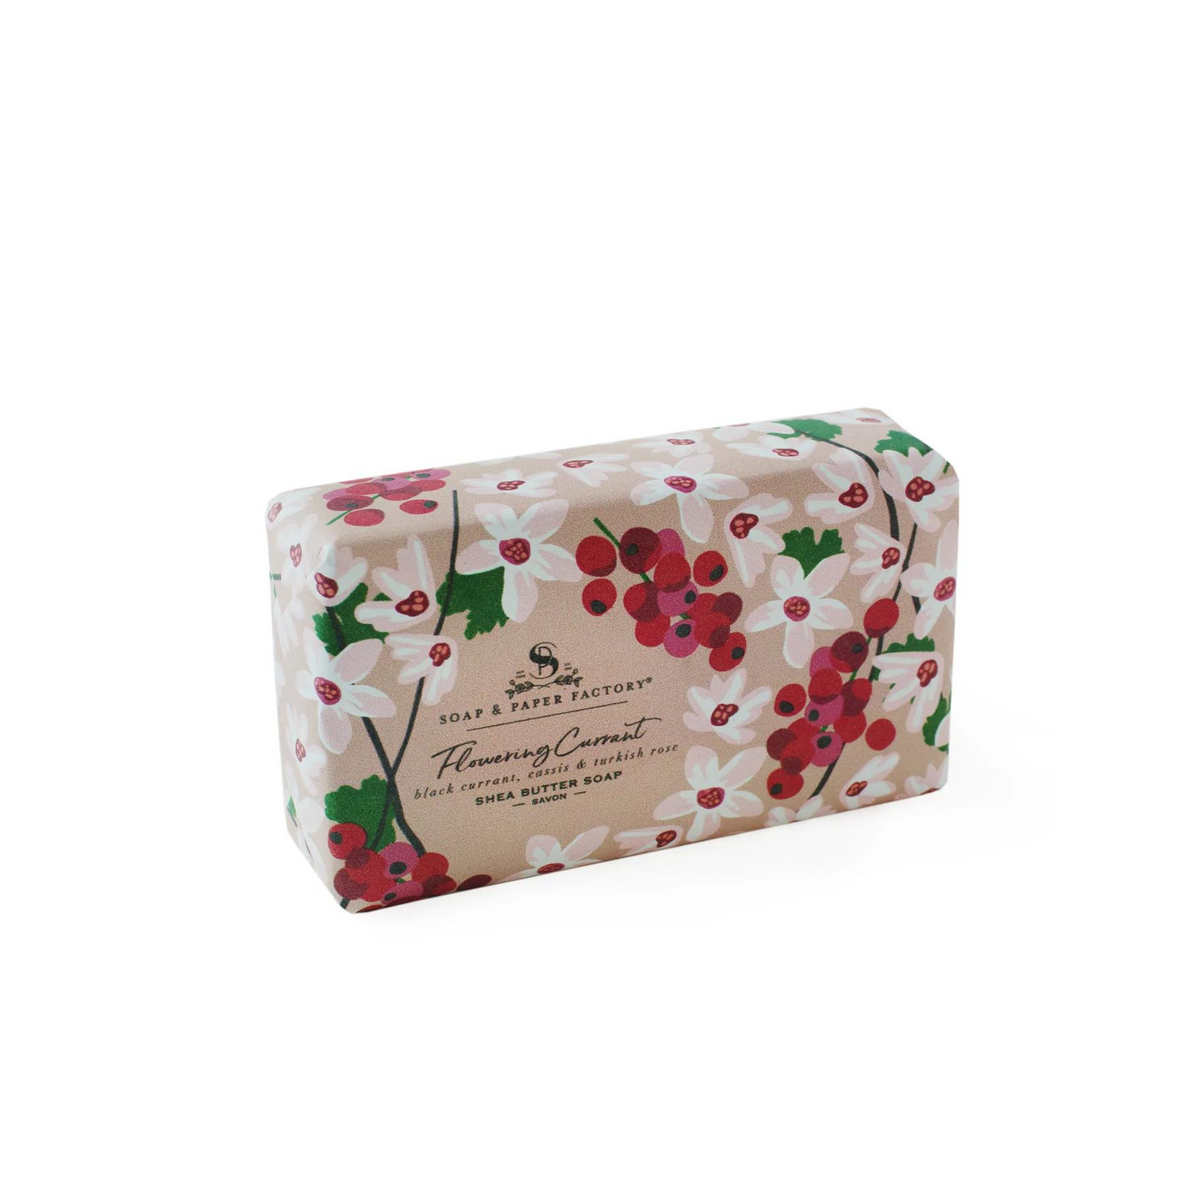 Primary Image of Soap & Paper Factory Flowering Currant Shea Butter Soap Bar (5 oz)